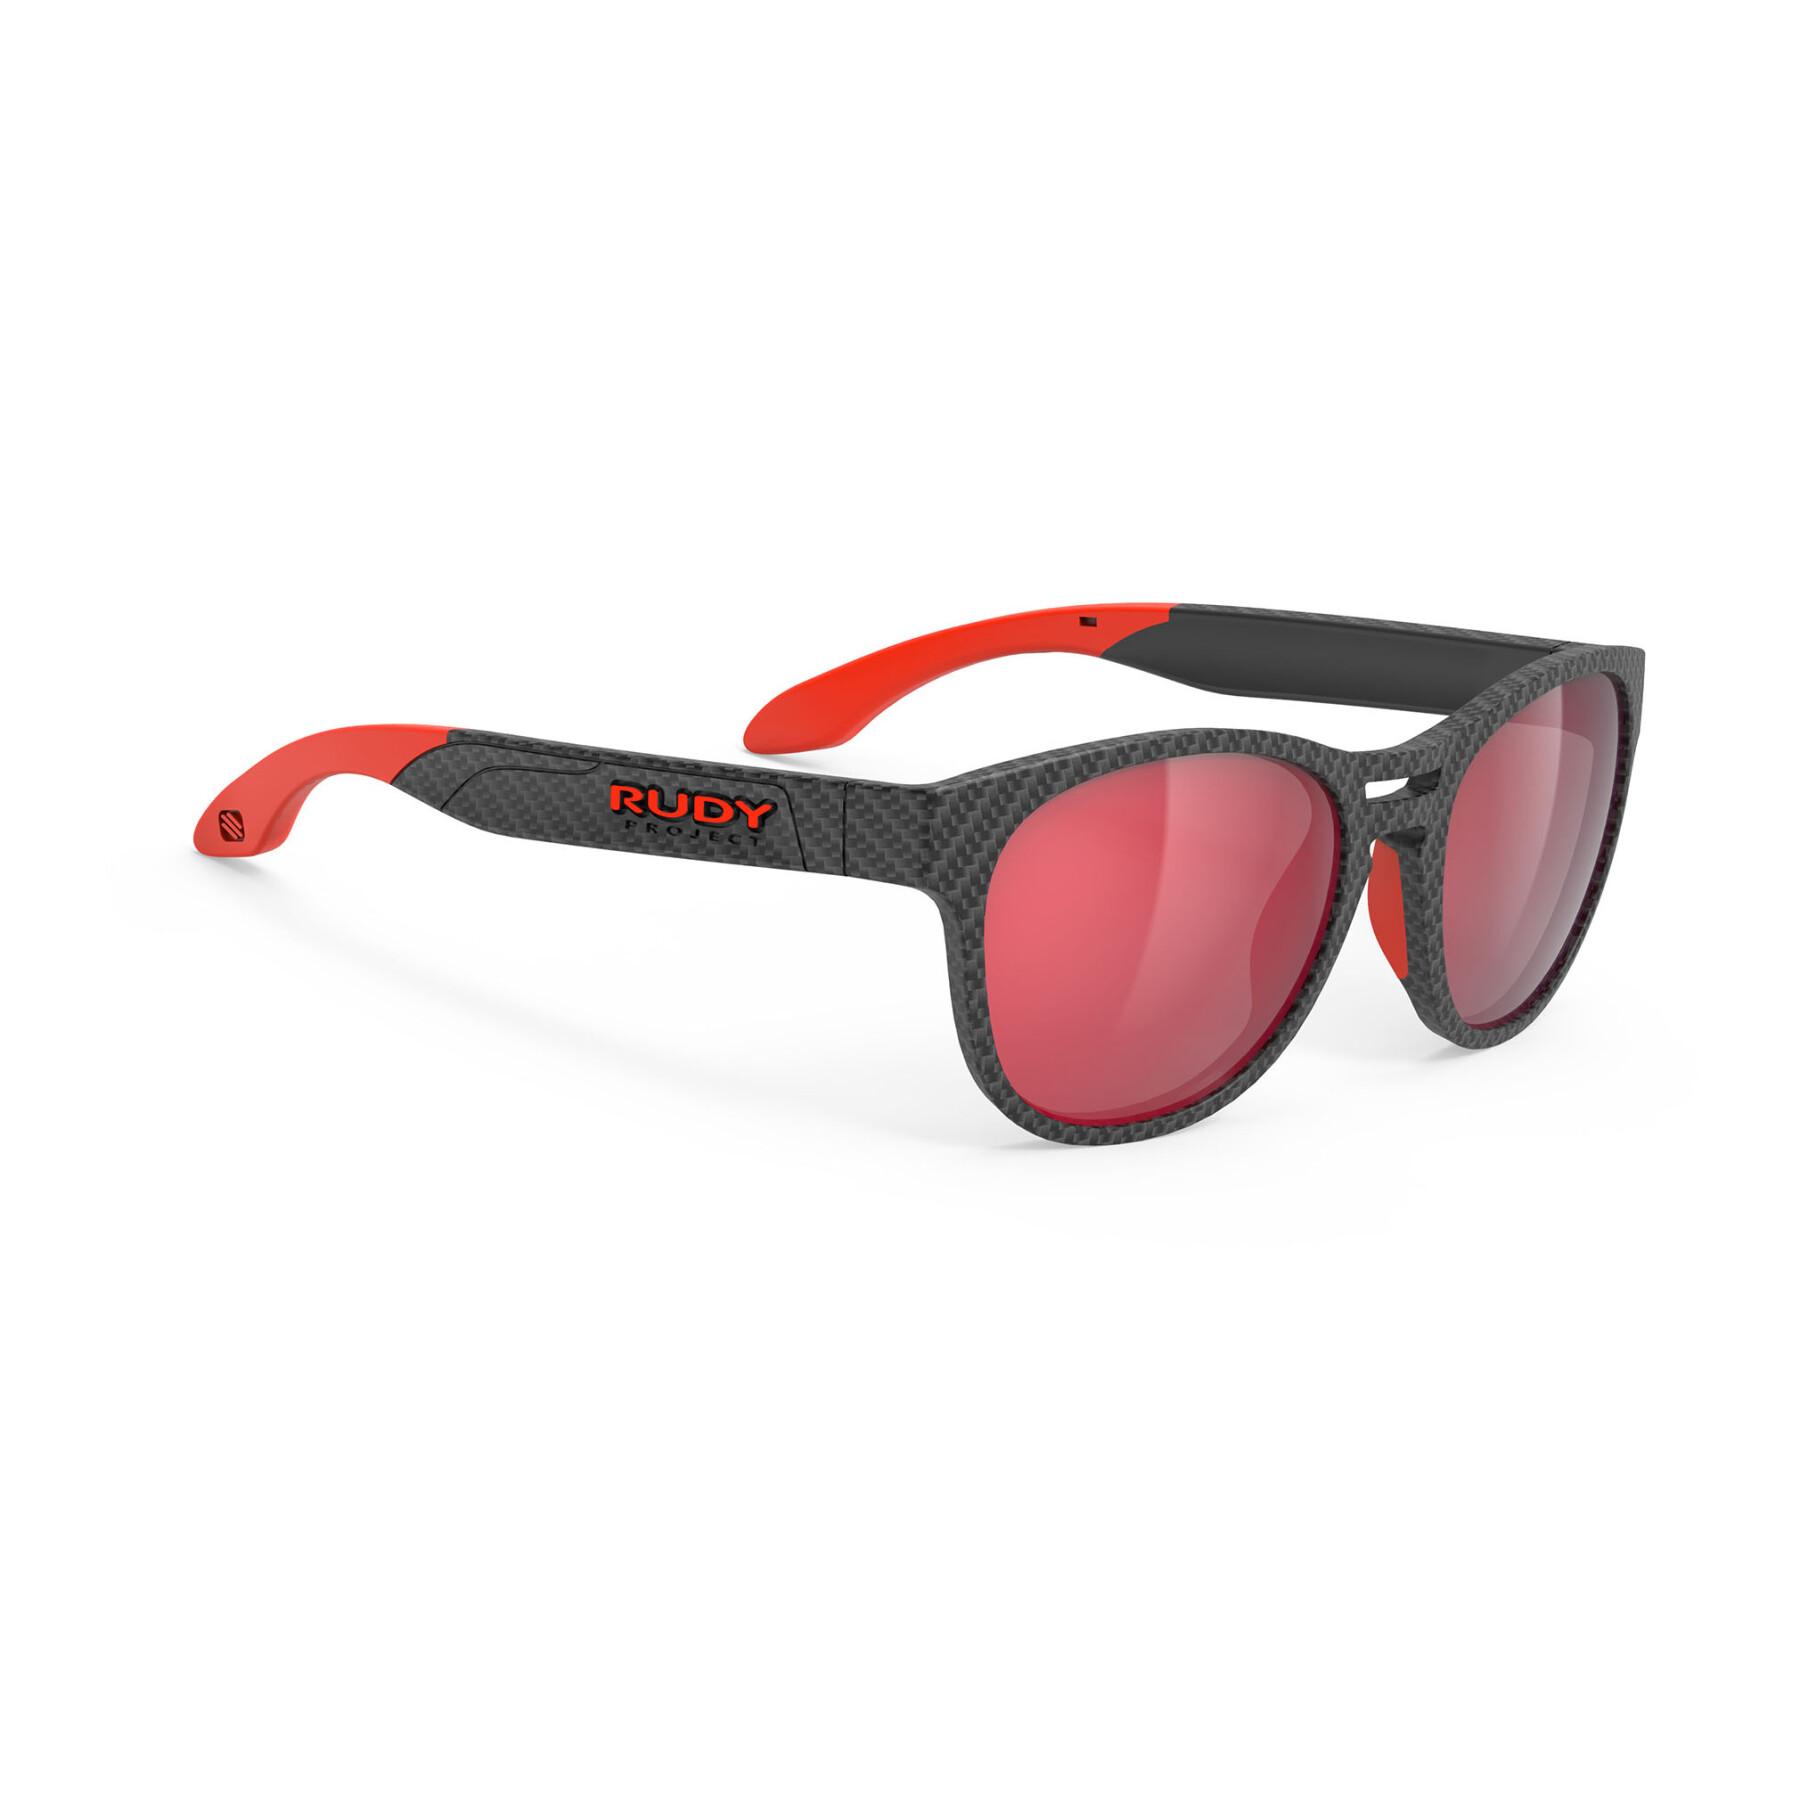 Gafas de sol Rudy Project spinair 56 water sports